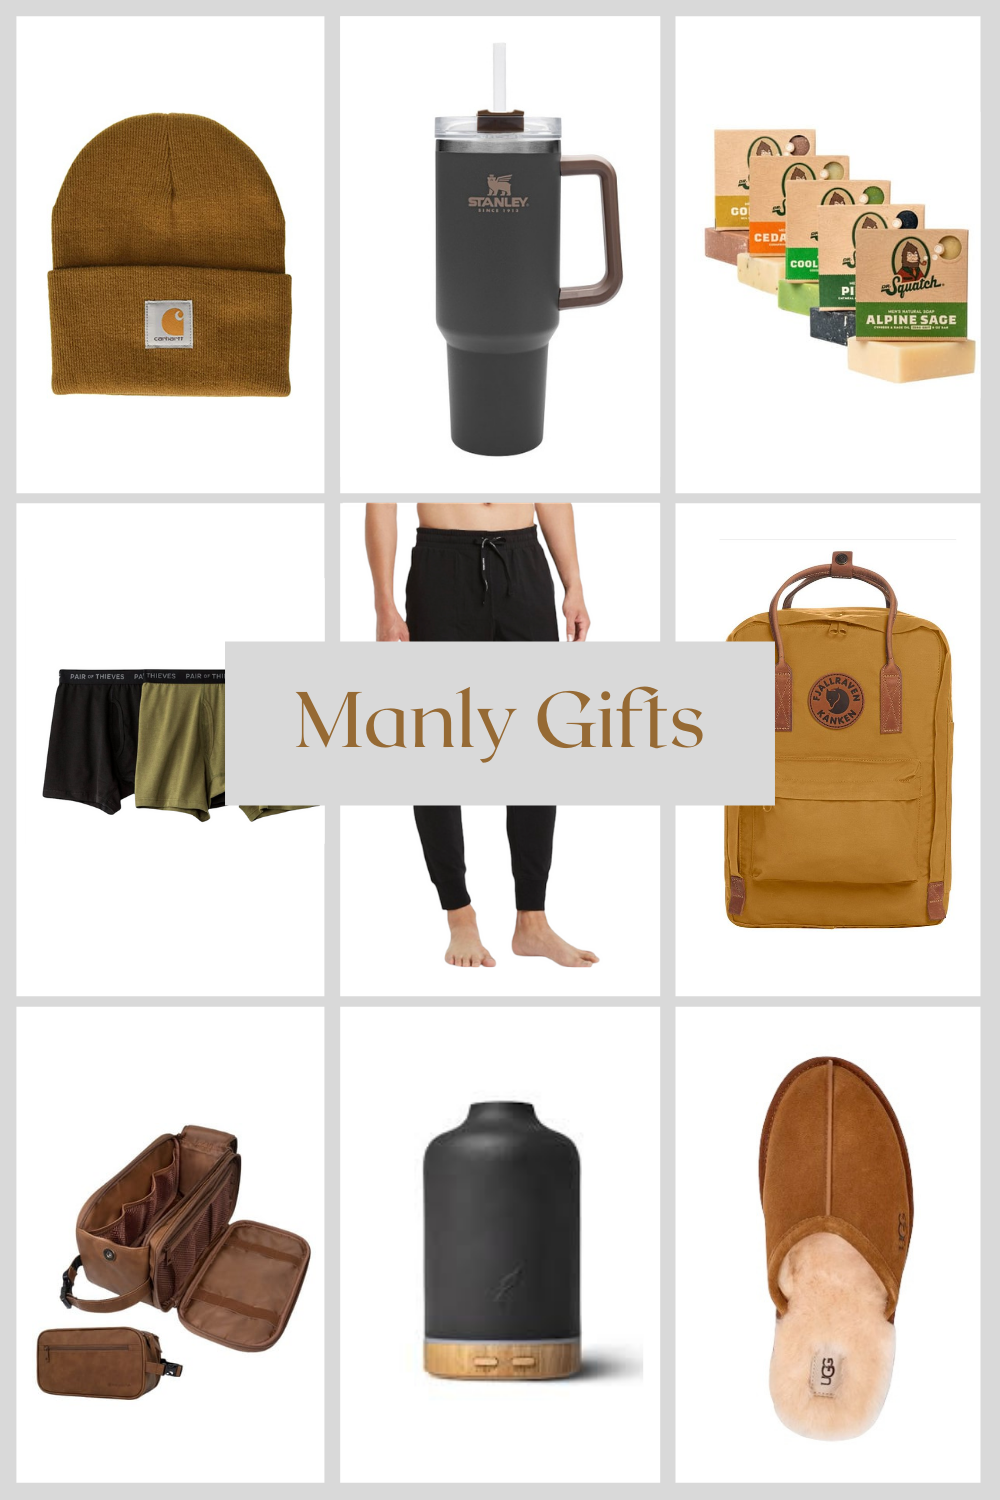 Manly gifts guide